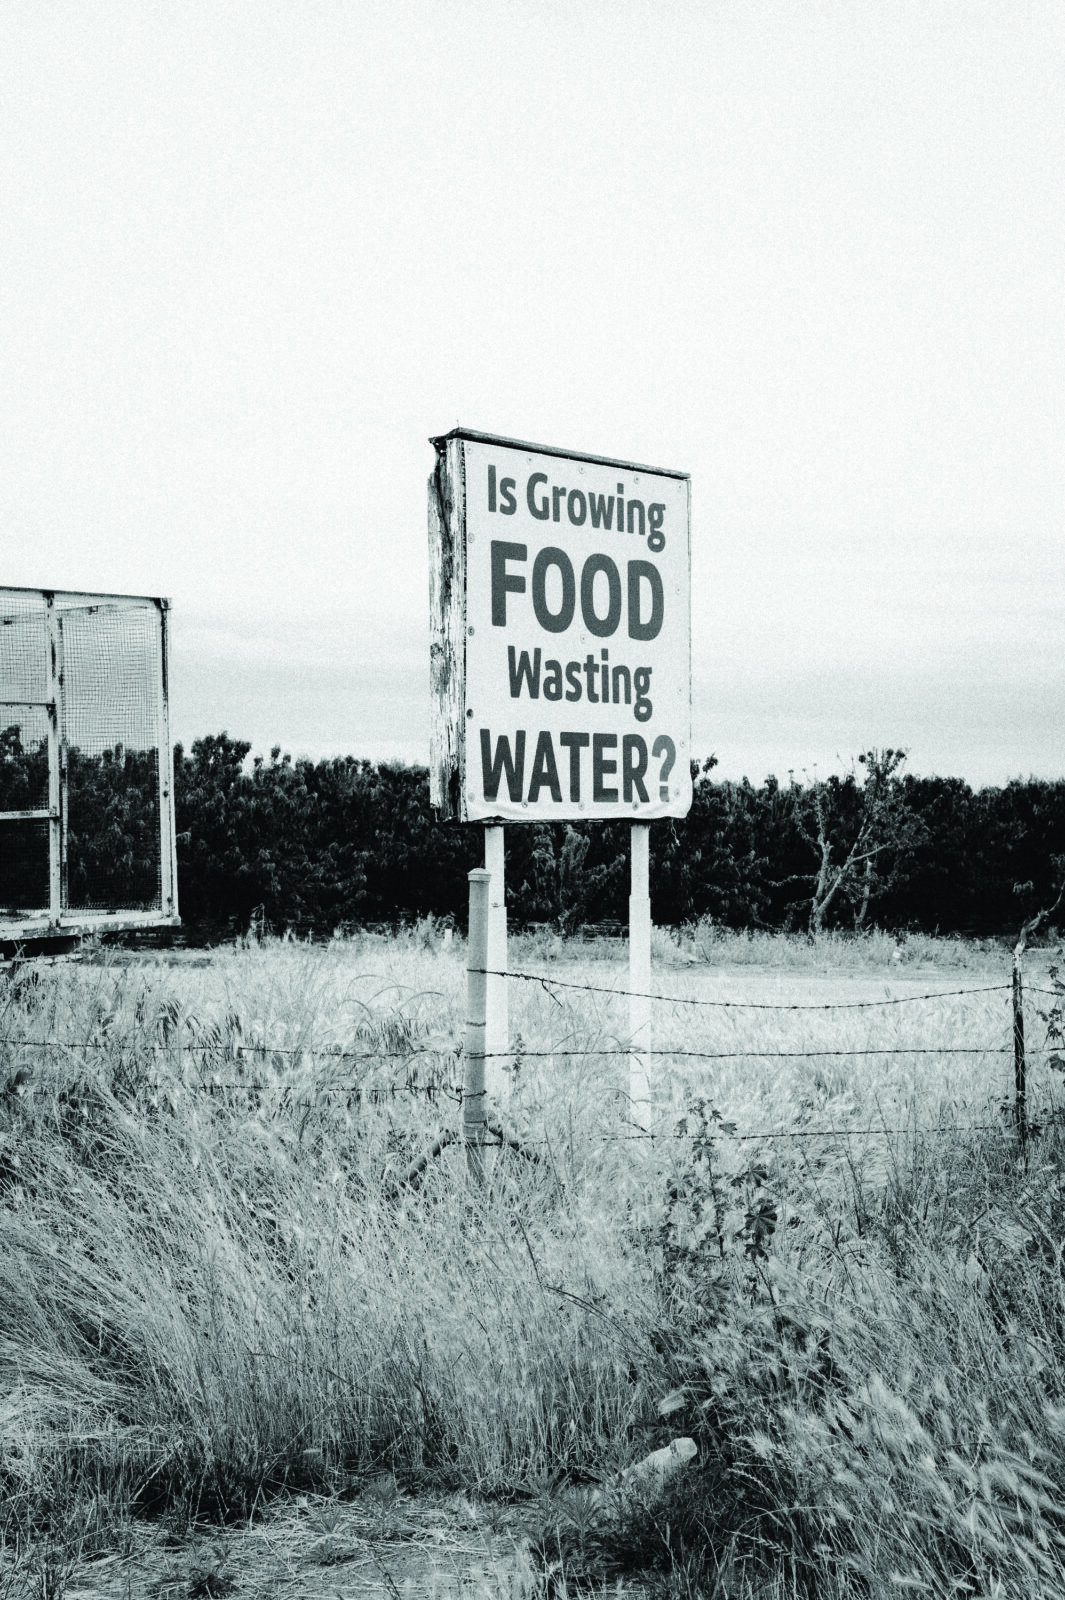 Sign reading "Is Growing Food Wasting Water?"